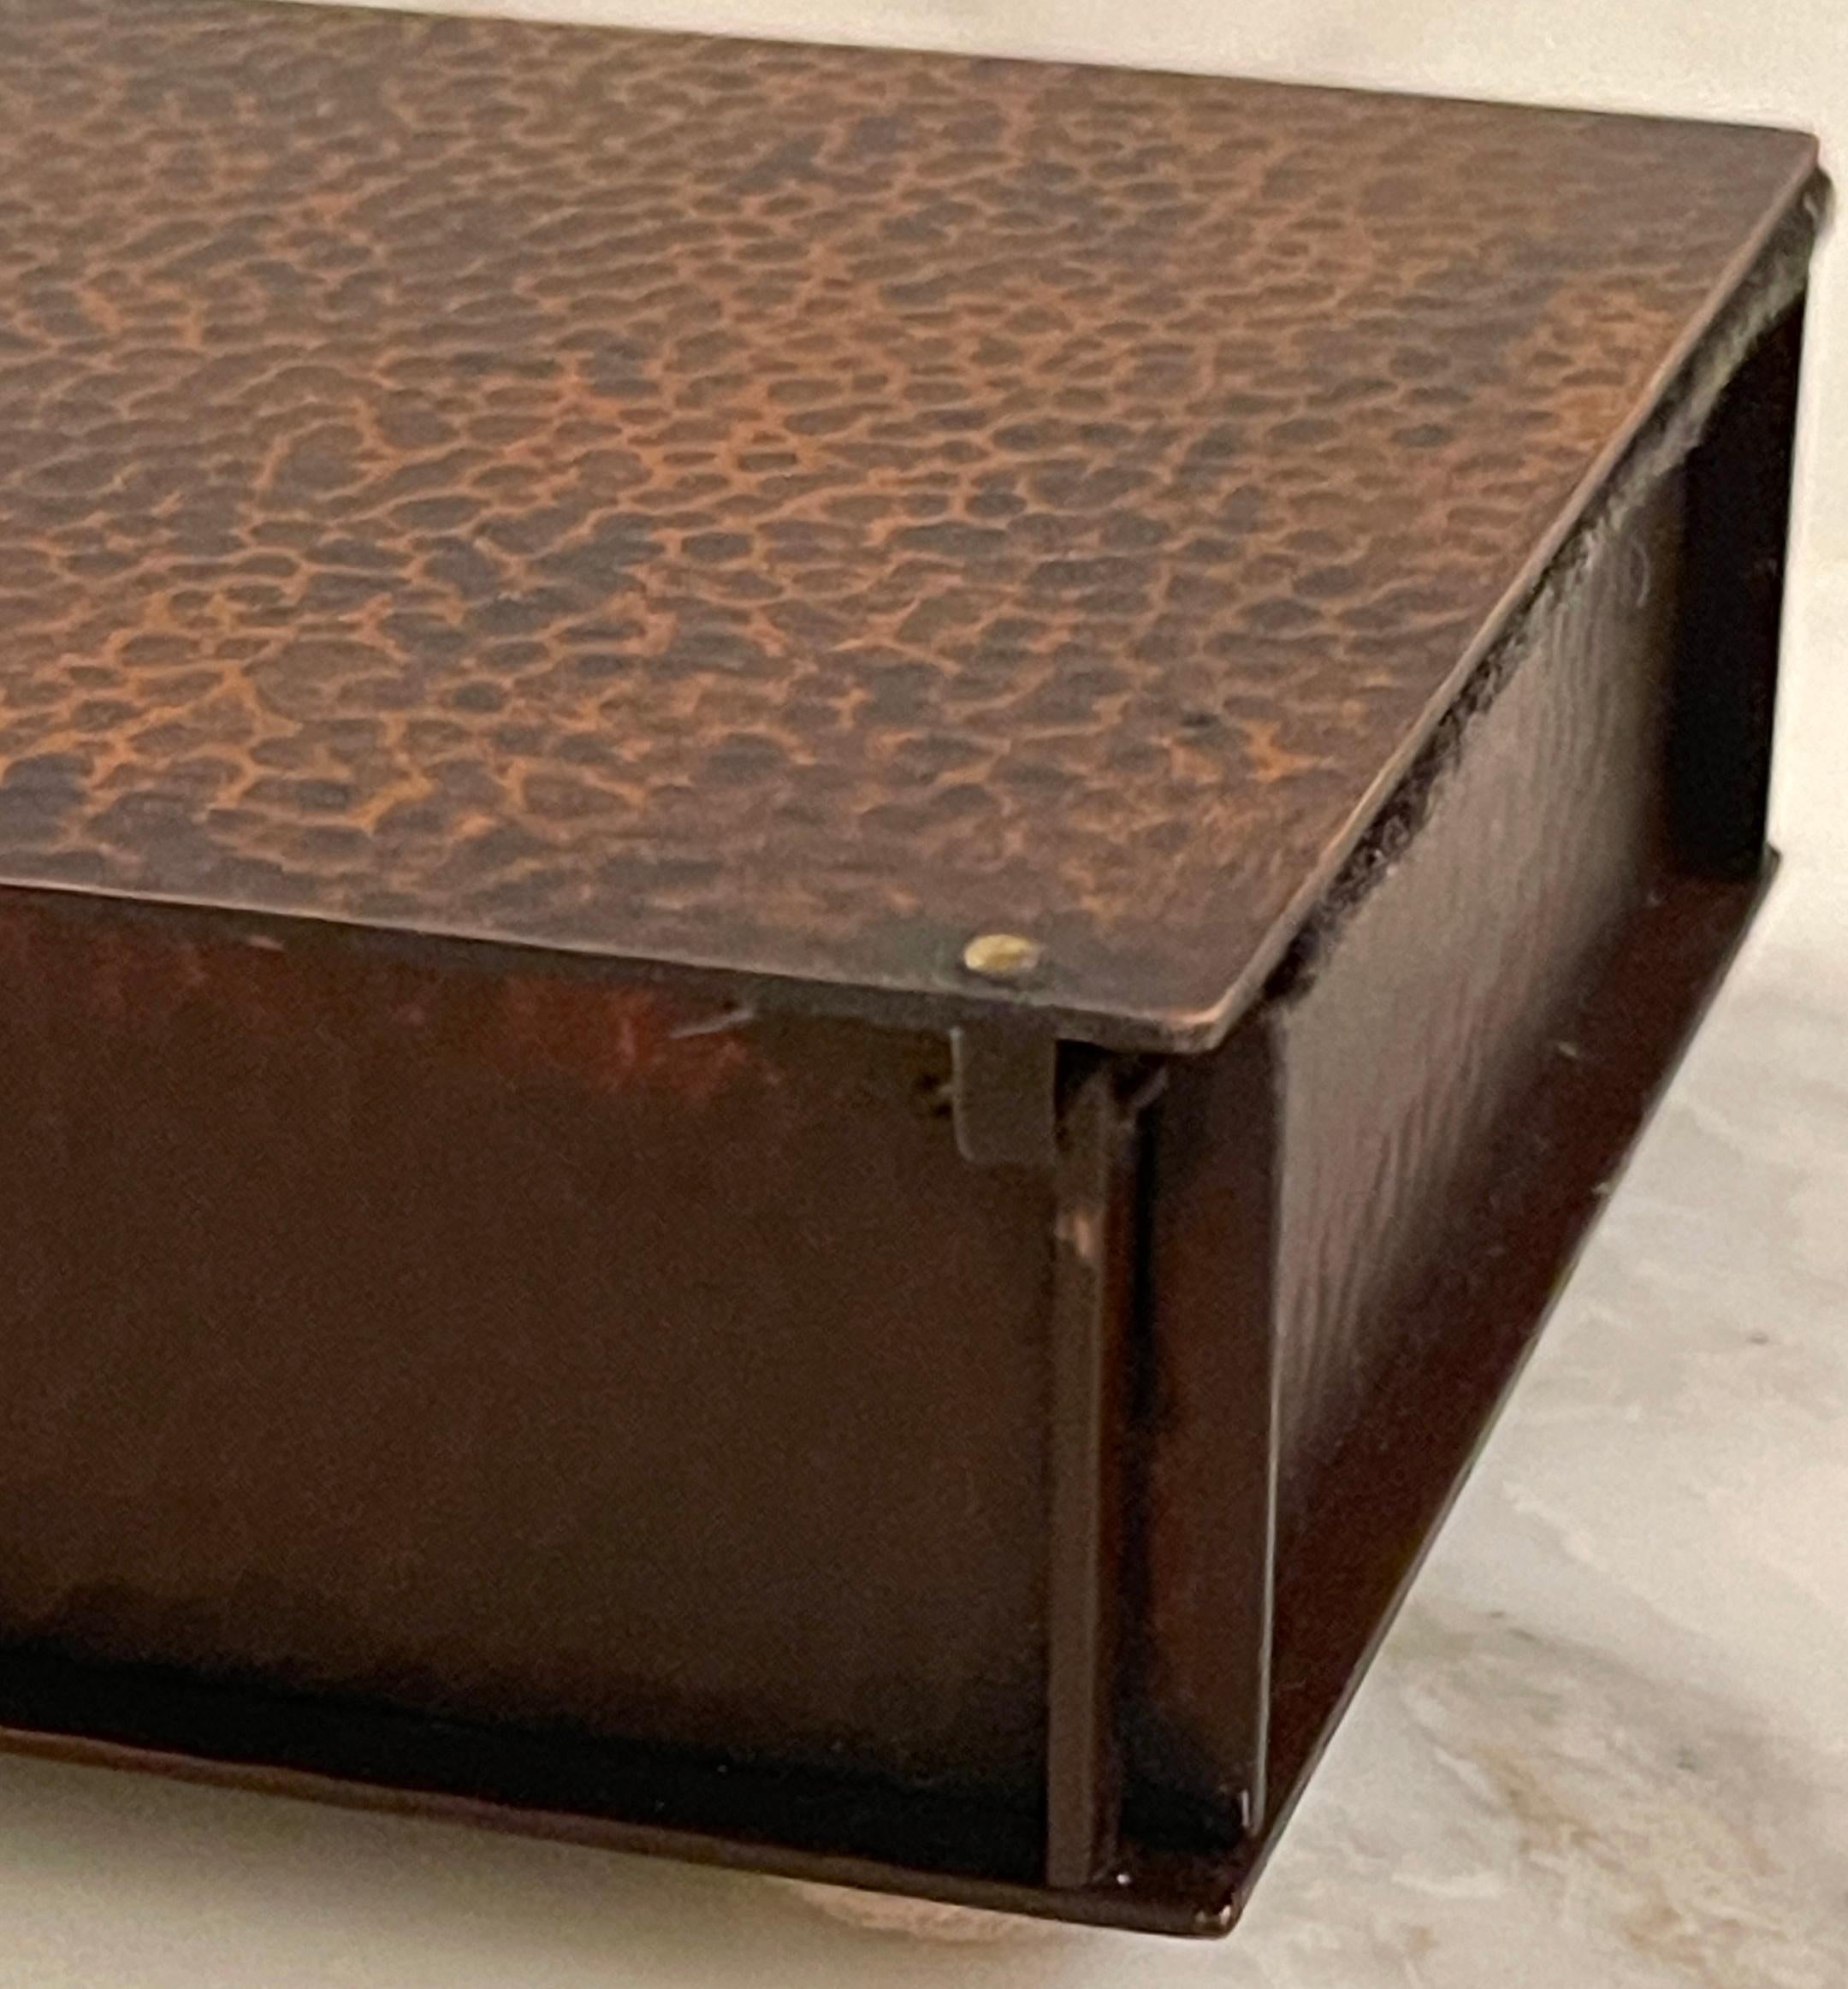 Roycroft Arts & Crafts Copper Table Box, from The Roycroft Inn at East Aurora NY For Sale 1